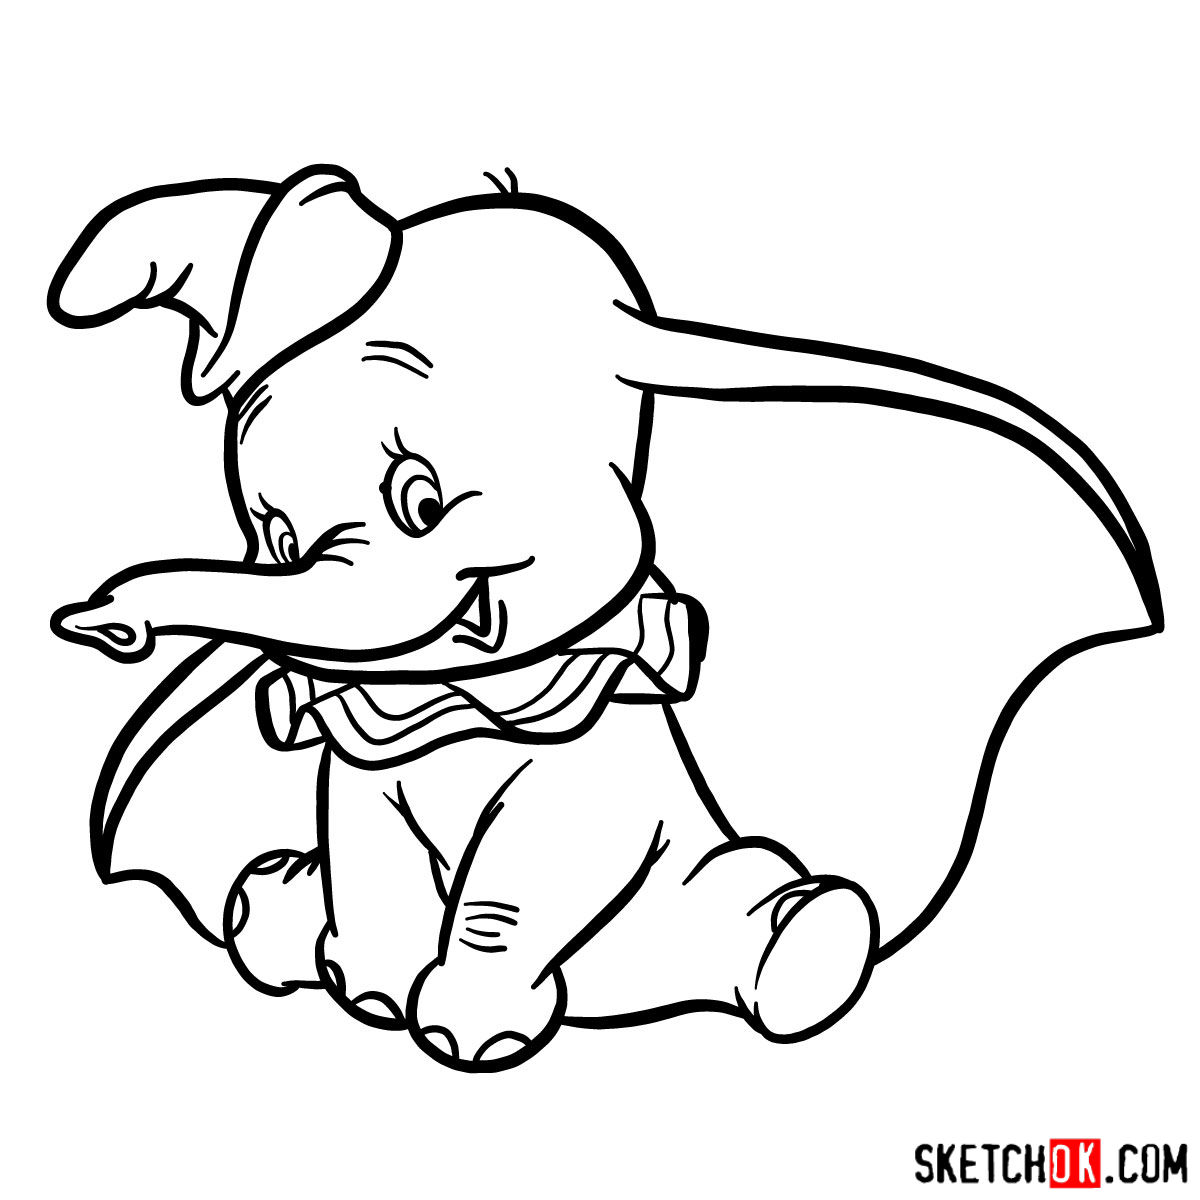 How to draw Dumbo the elephant - step 11